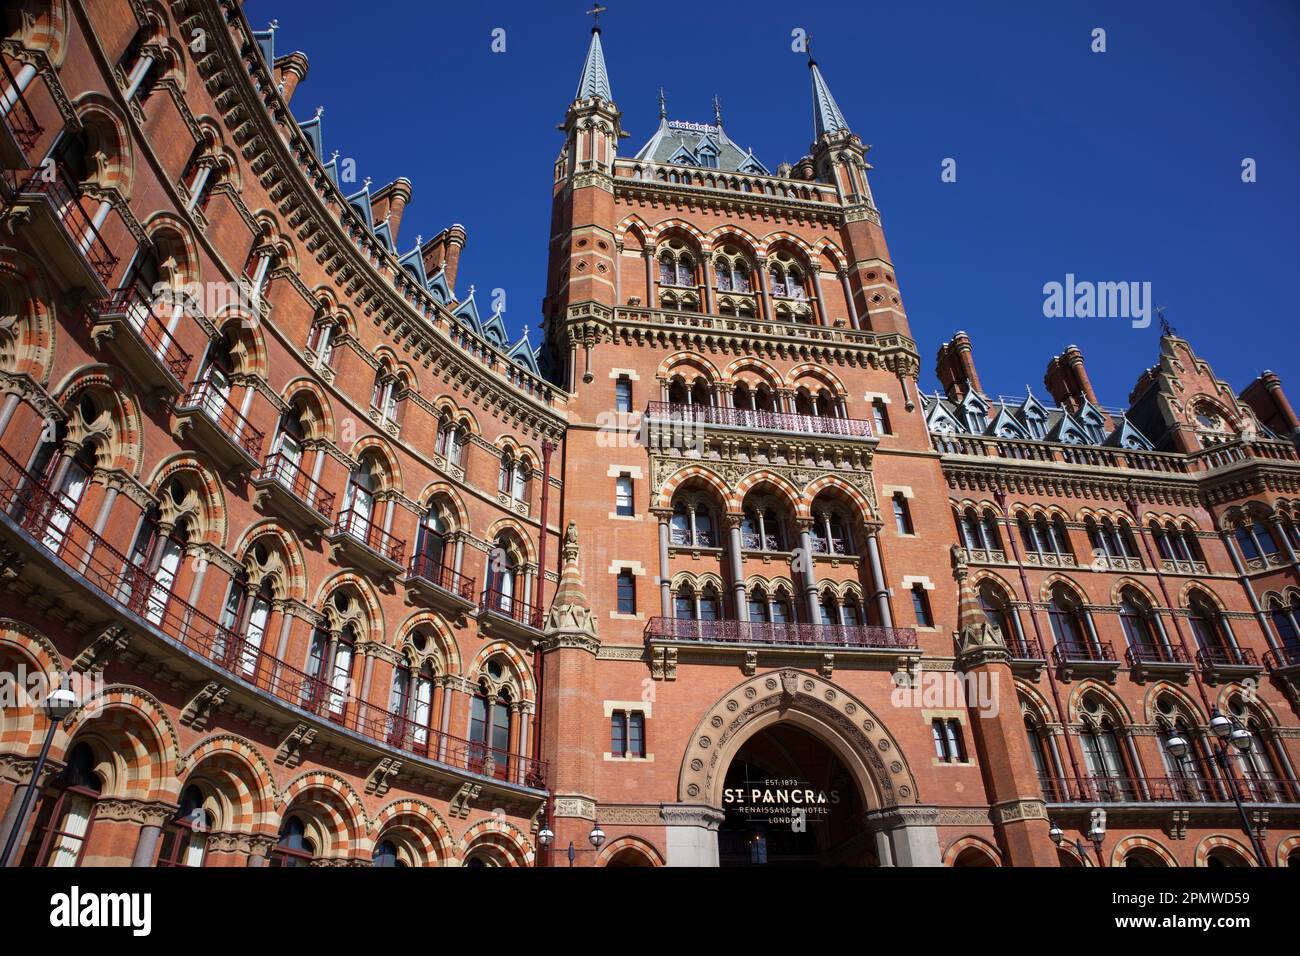 The Midland Hotel at St Pancras Station, London Stock Photo